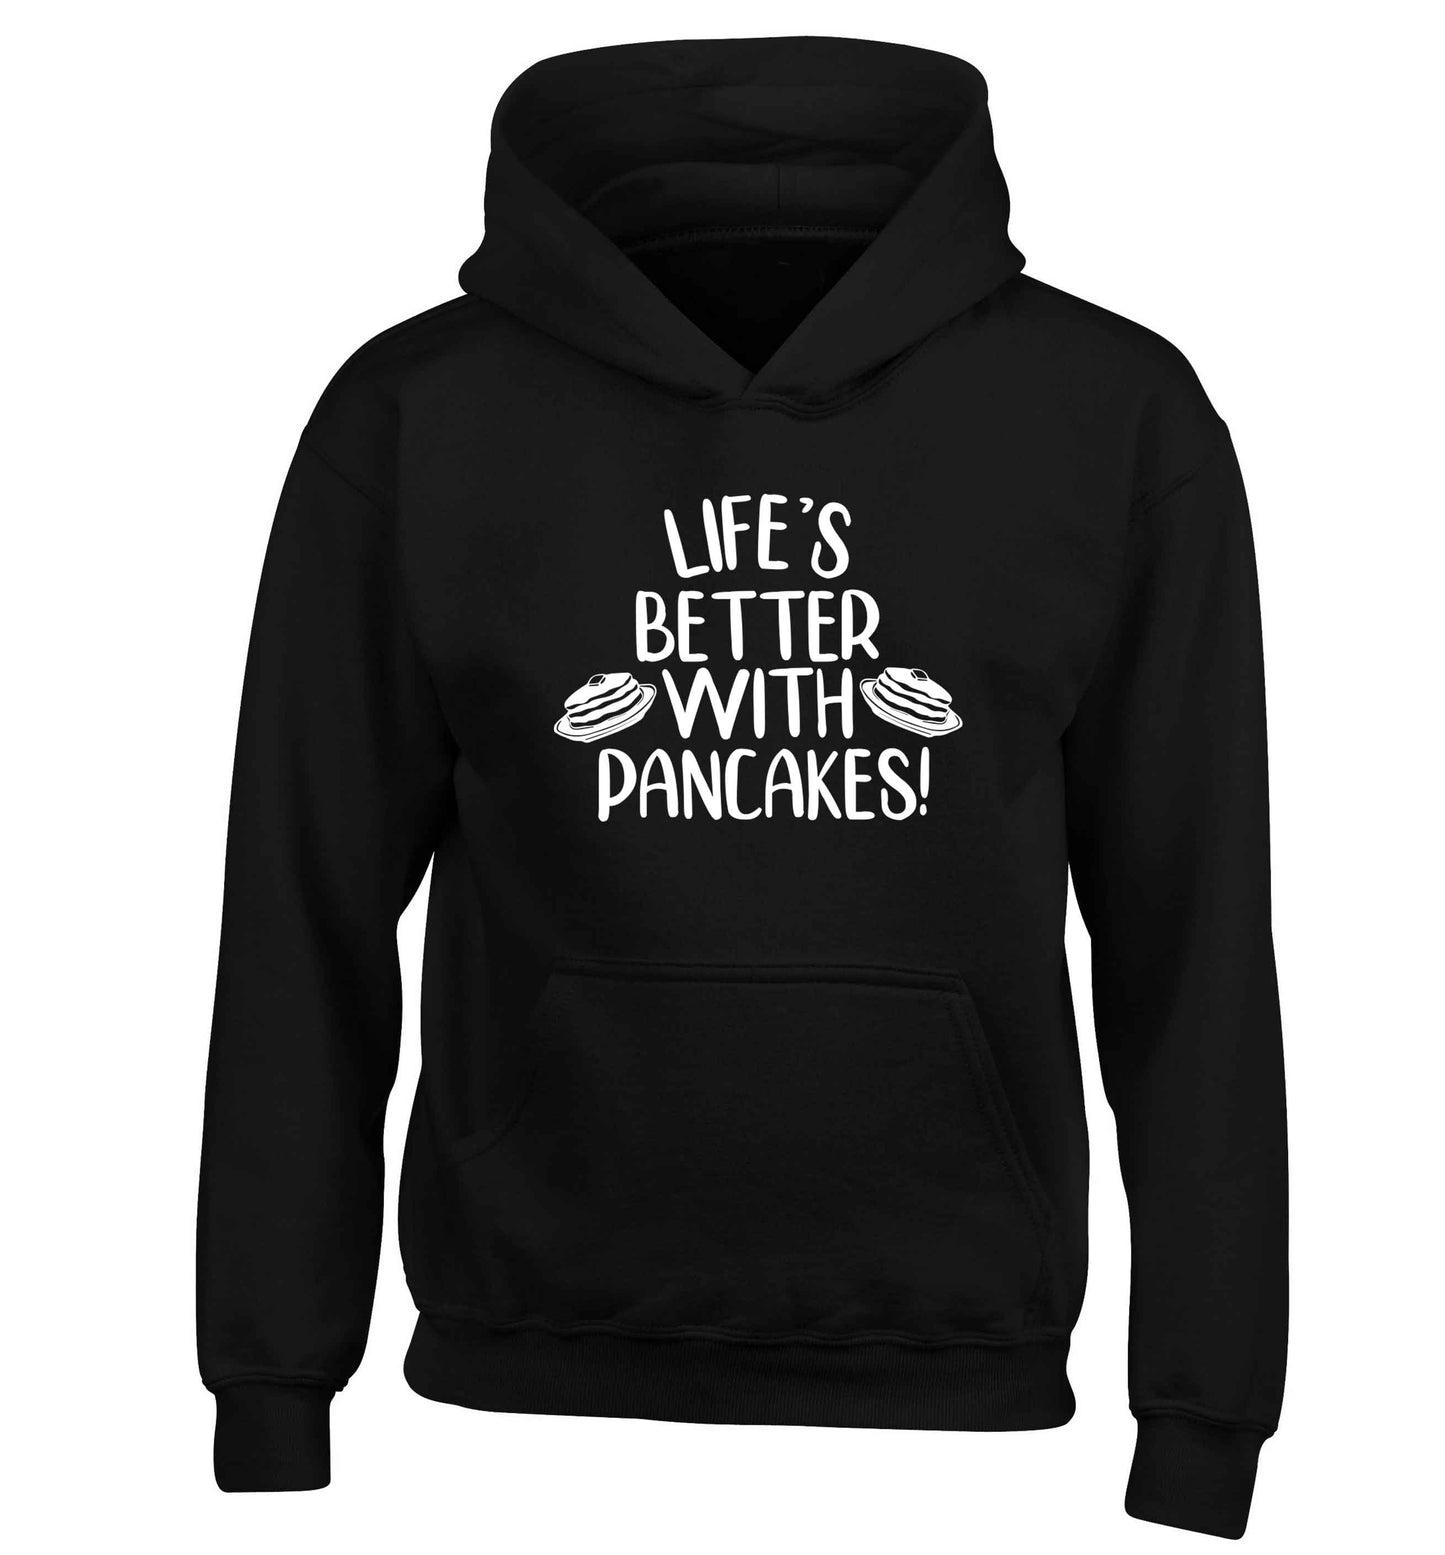 Life's better with pancakes children's black hoodie 12-13 Years